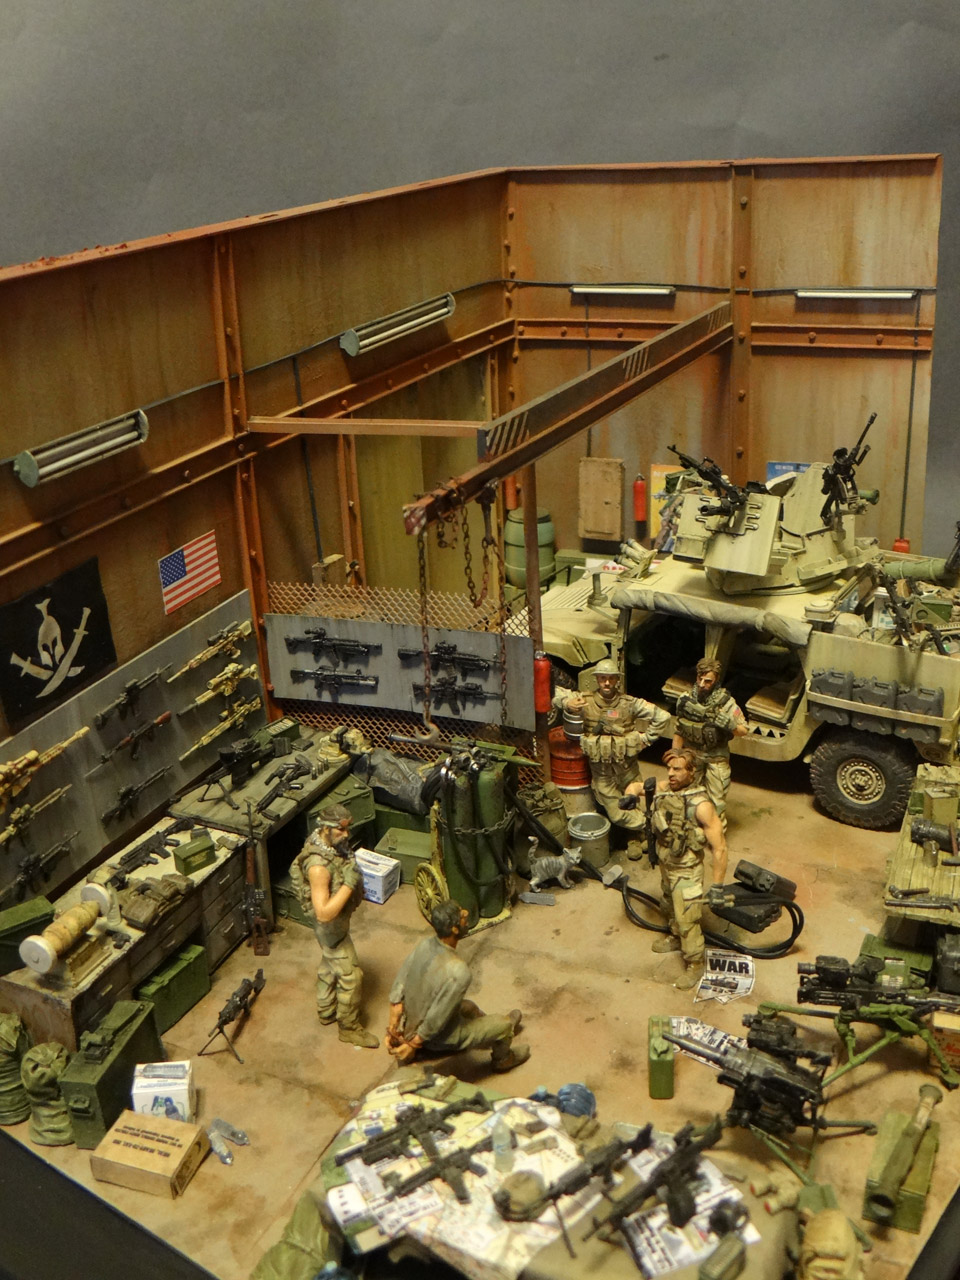 Dioramas and Vignettes: Enforcement to democracy, photo #9